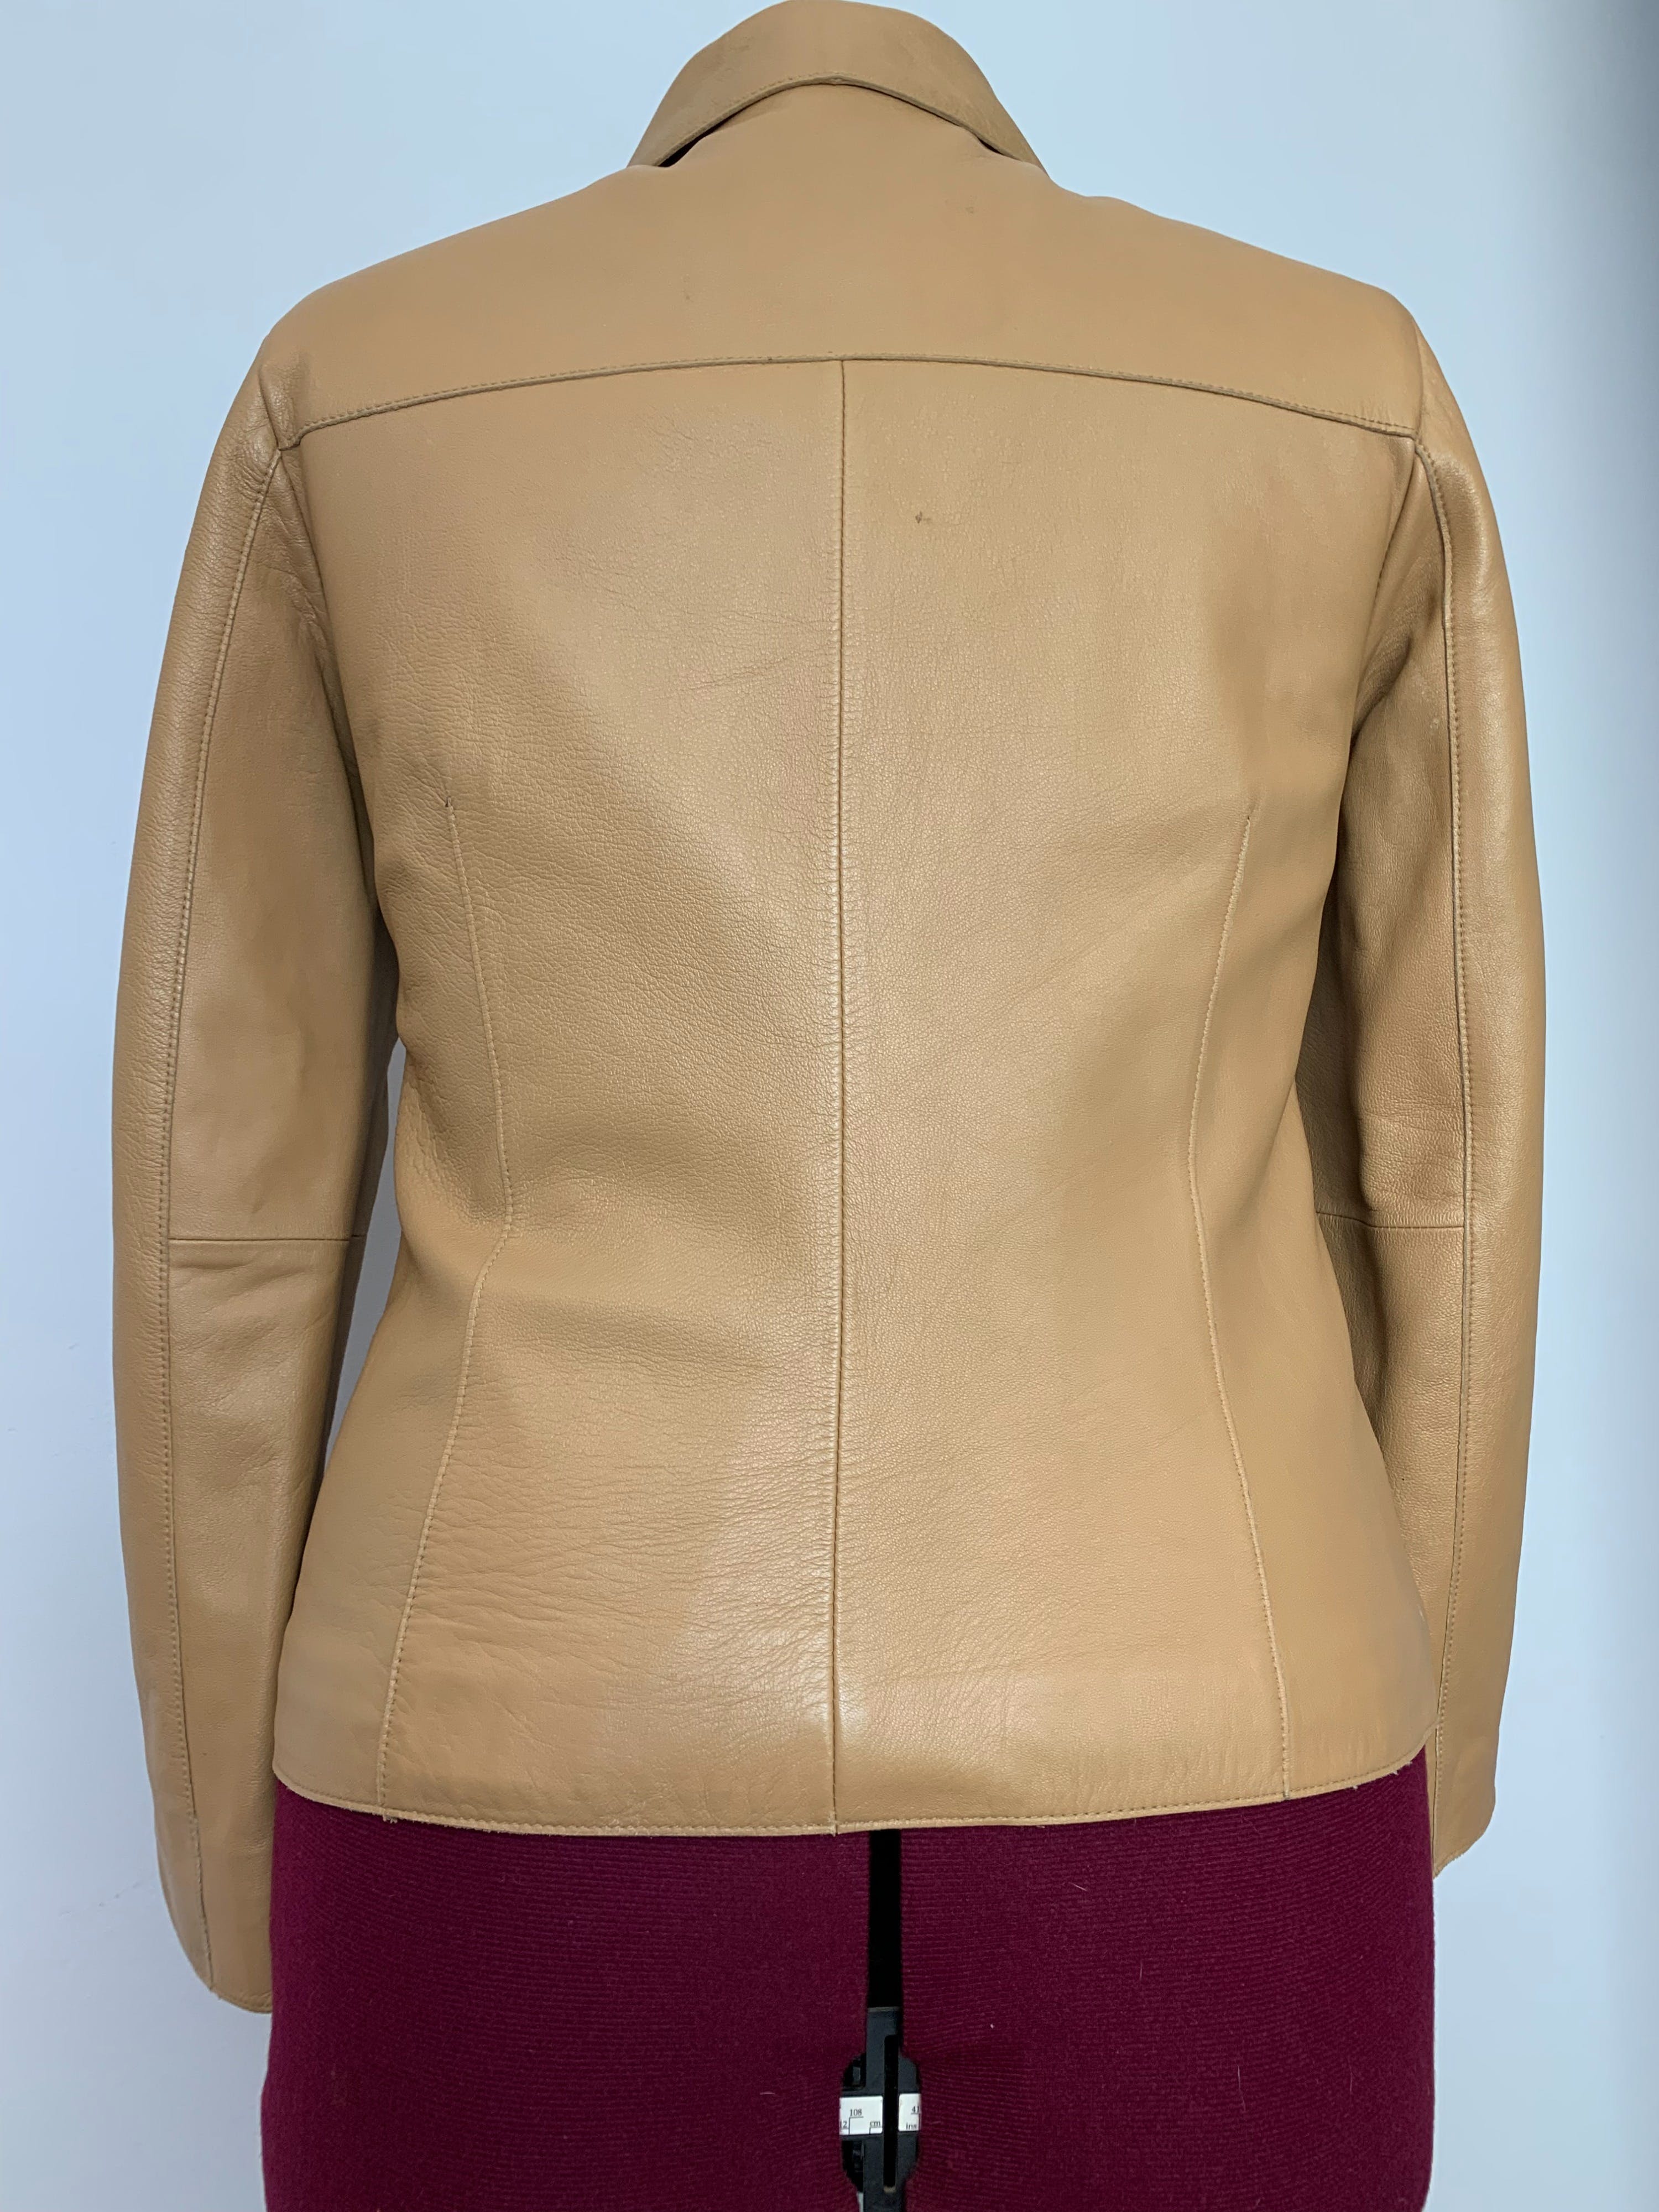 Vintage Blond Leather Zipped Jacket by Wilson Leather | Shop THRILLING